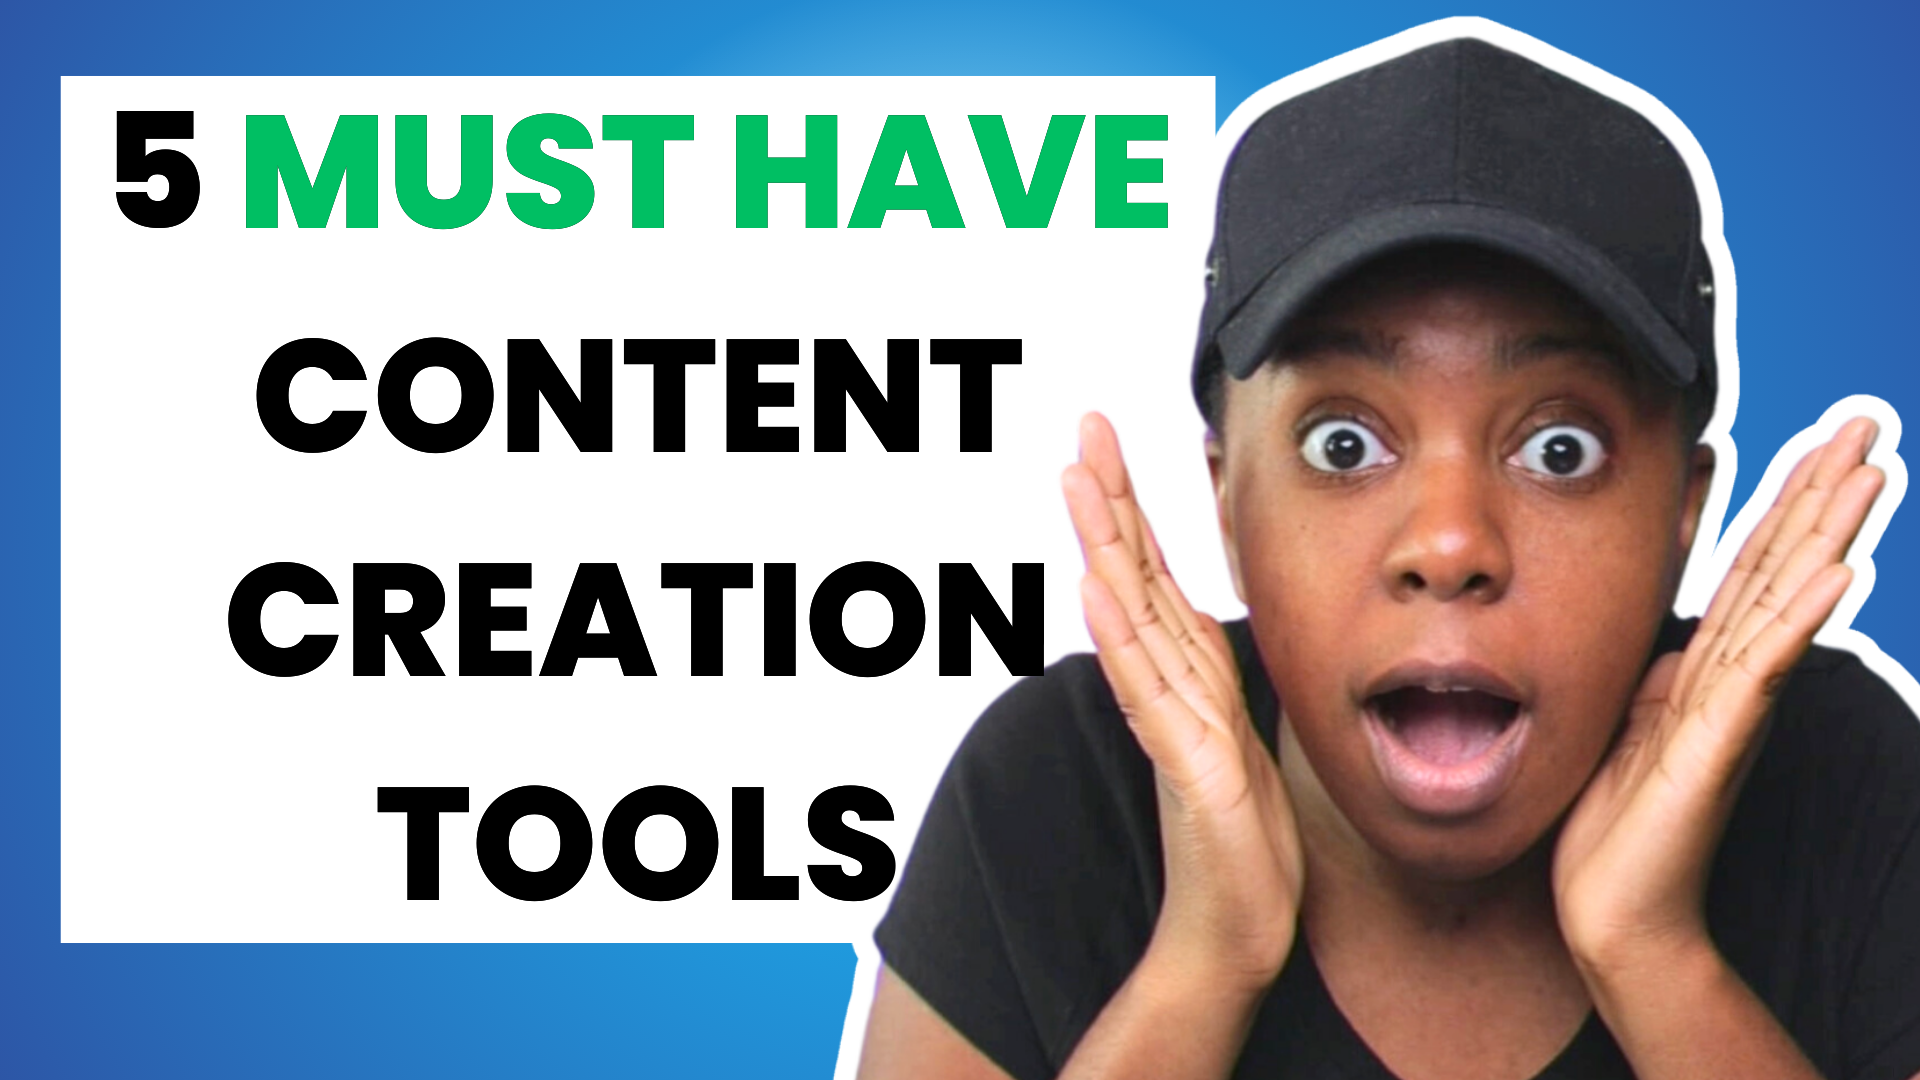 5 MUST HAVE Content Creation Tools